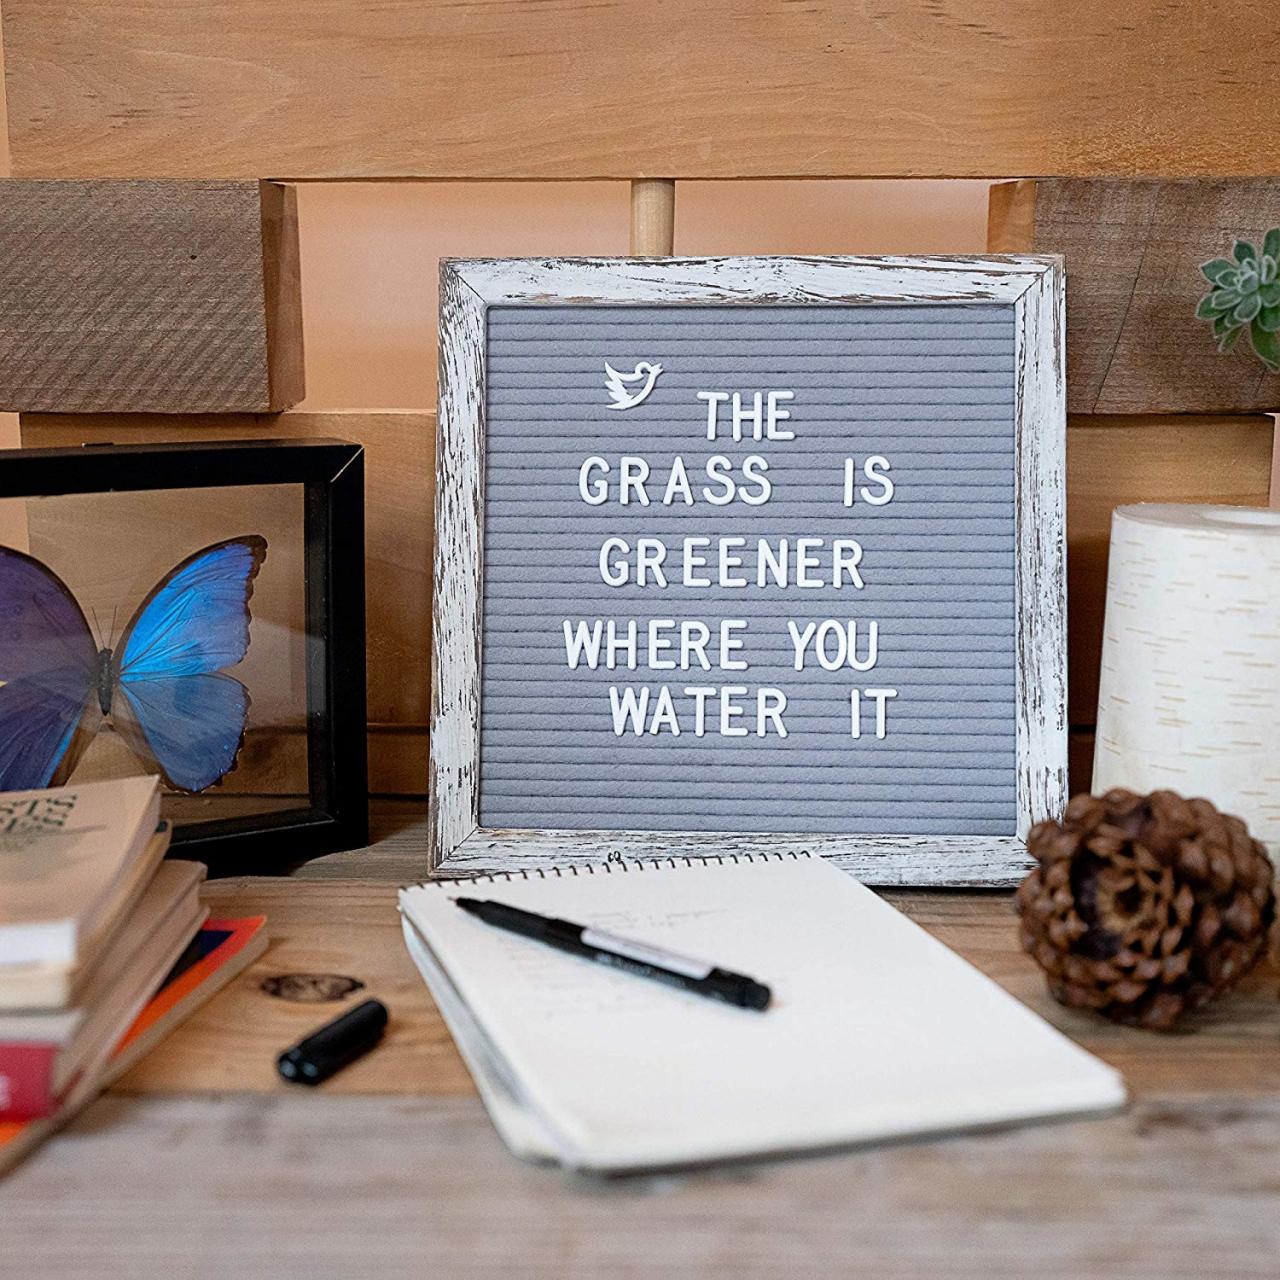 22 Smart Letter Board Quotes and Ideas - Rhythm of the Home